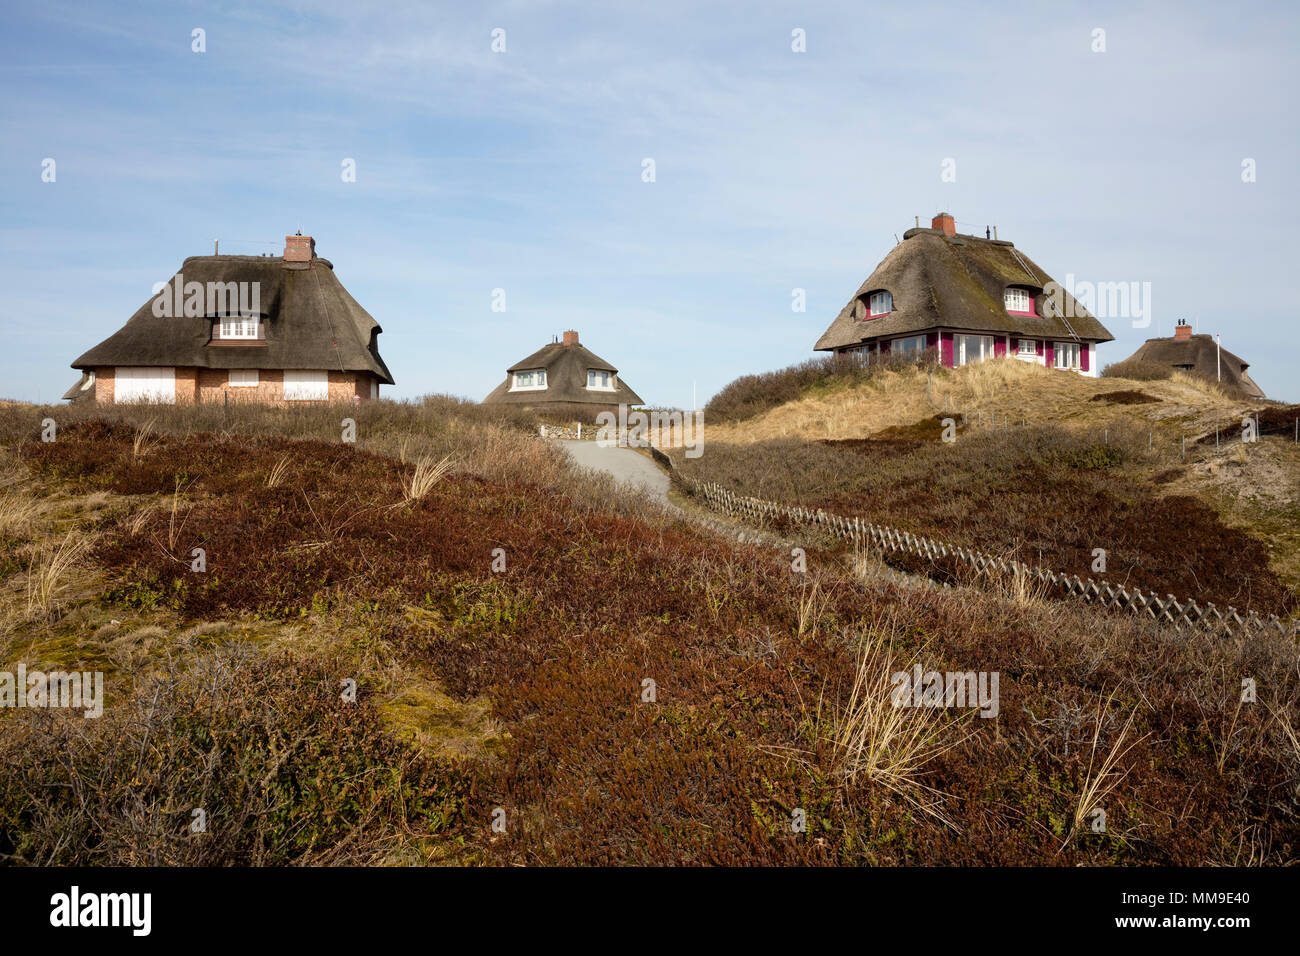 Thatched houses, dune landscape, Hörnum, Sylt, North Frisian Island, North Frisia, Schleswig-Holstein, Germany Stock Photo